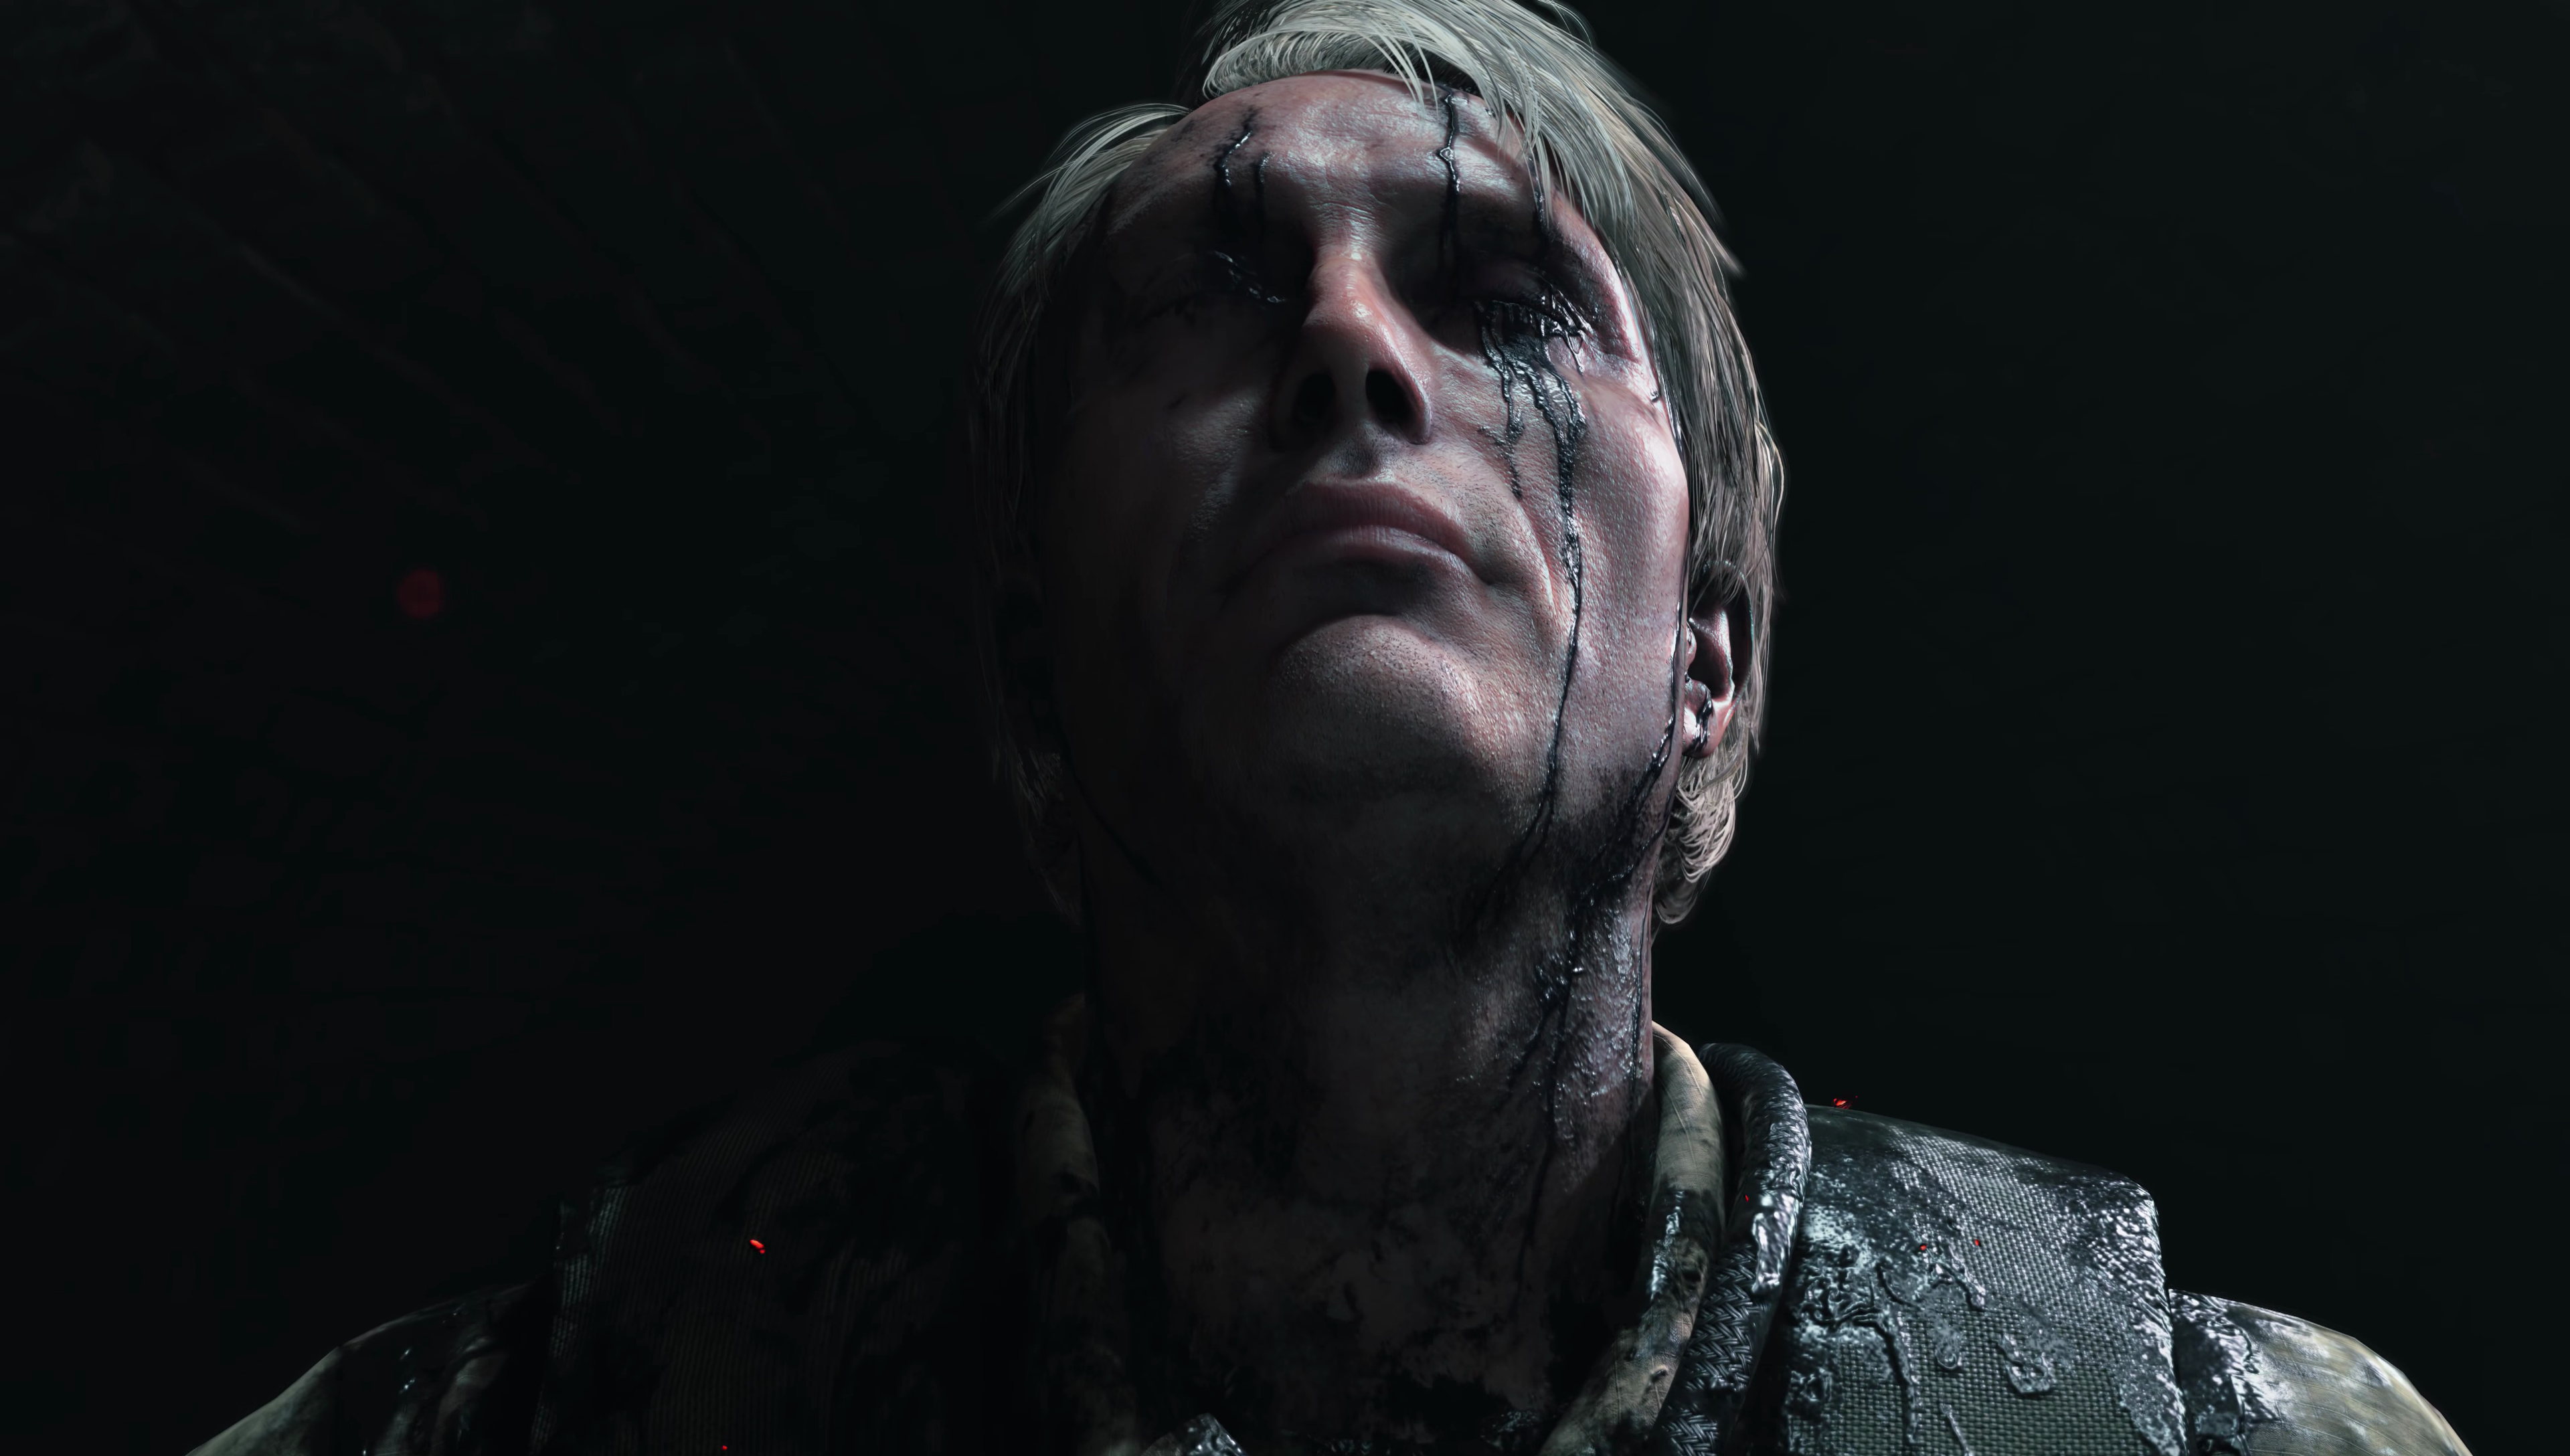 General 3840x2176 Death Stranding Hideo Kojima Kojima Productions apocalyptic horror Mads Mikkelsen video games actor Danish 505 Games video game characters